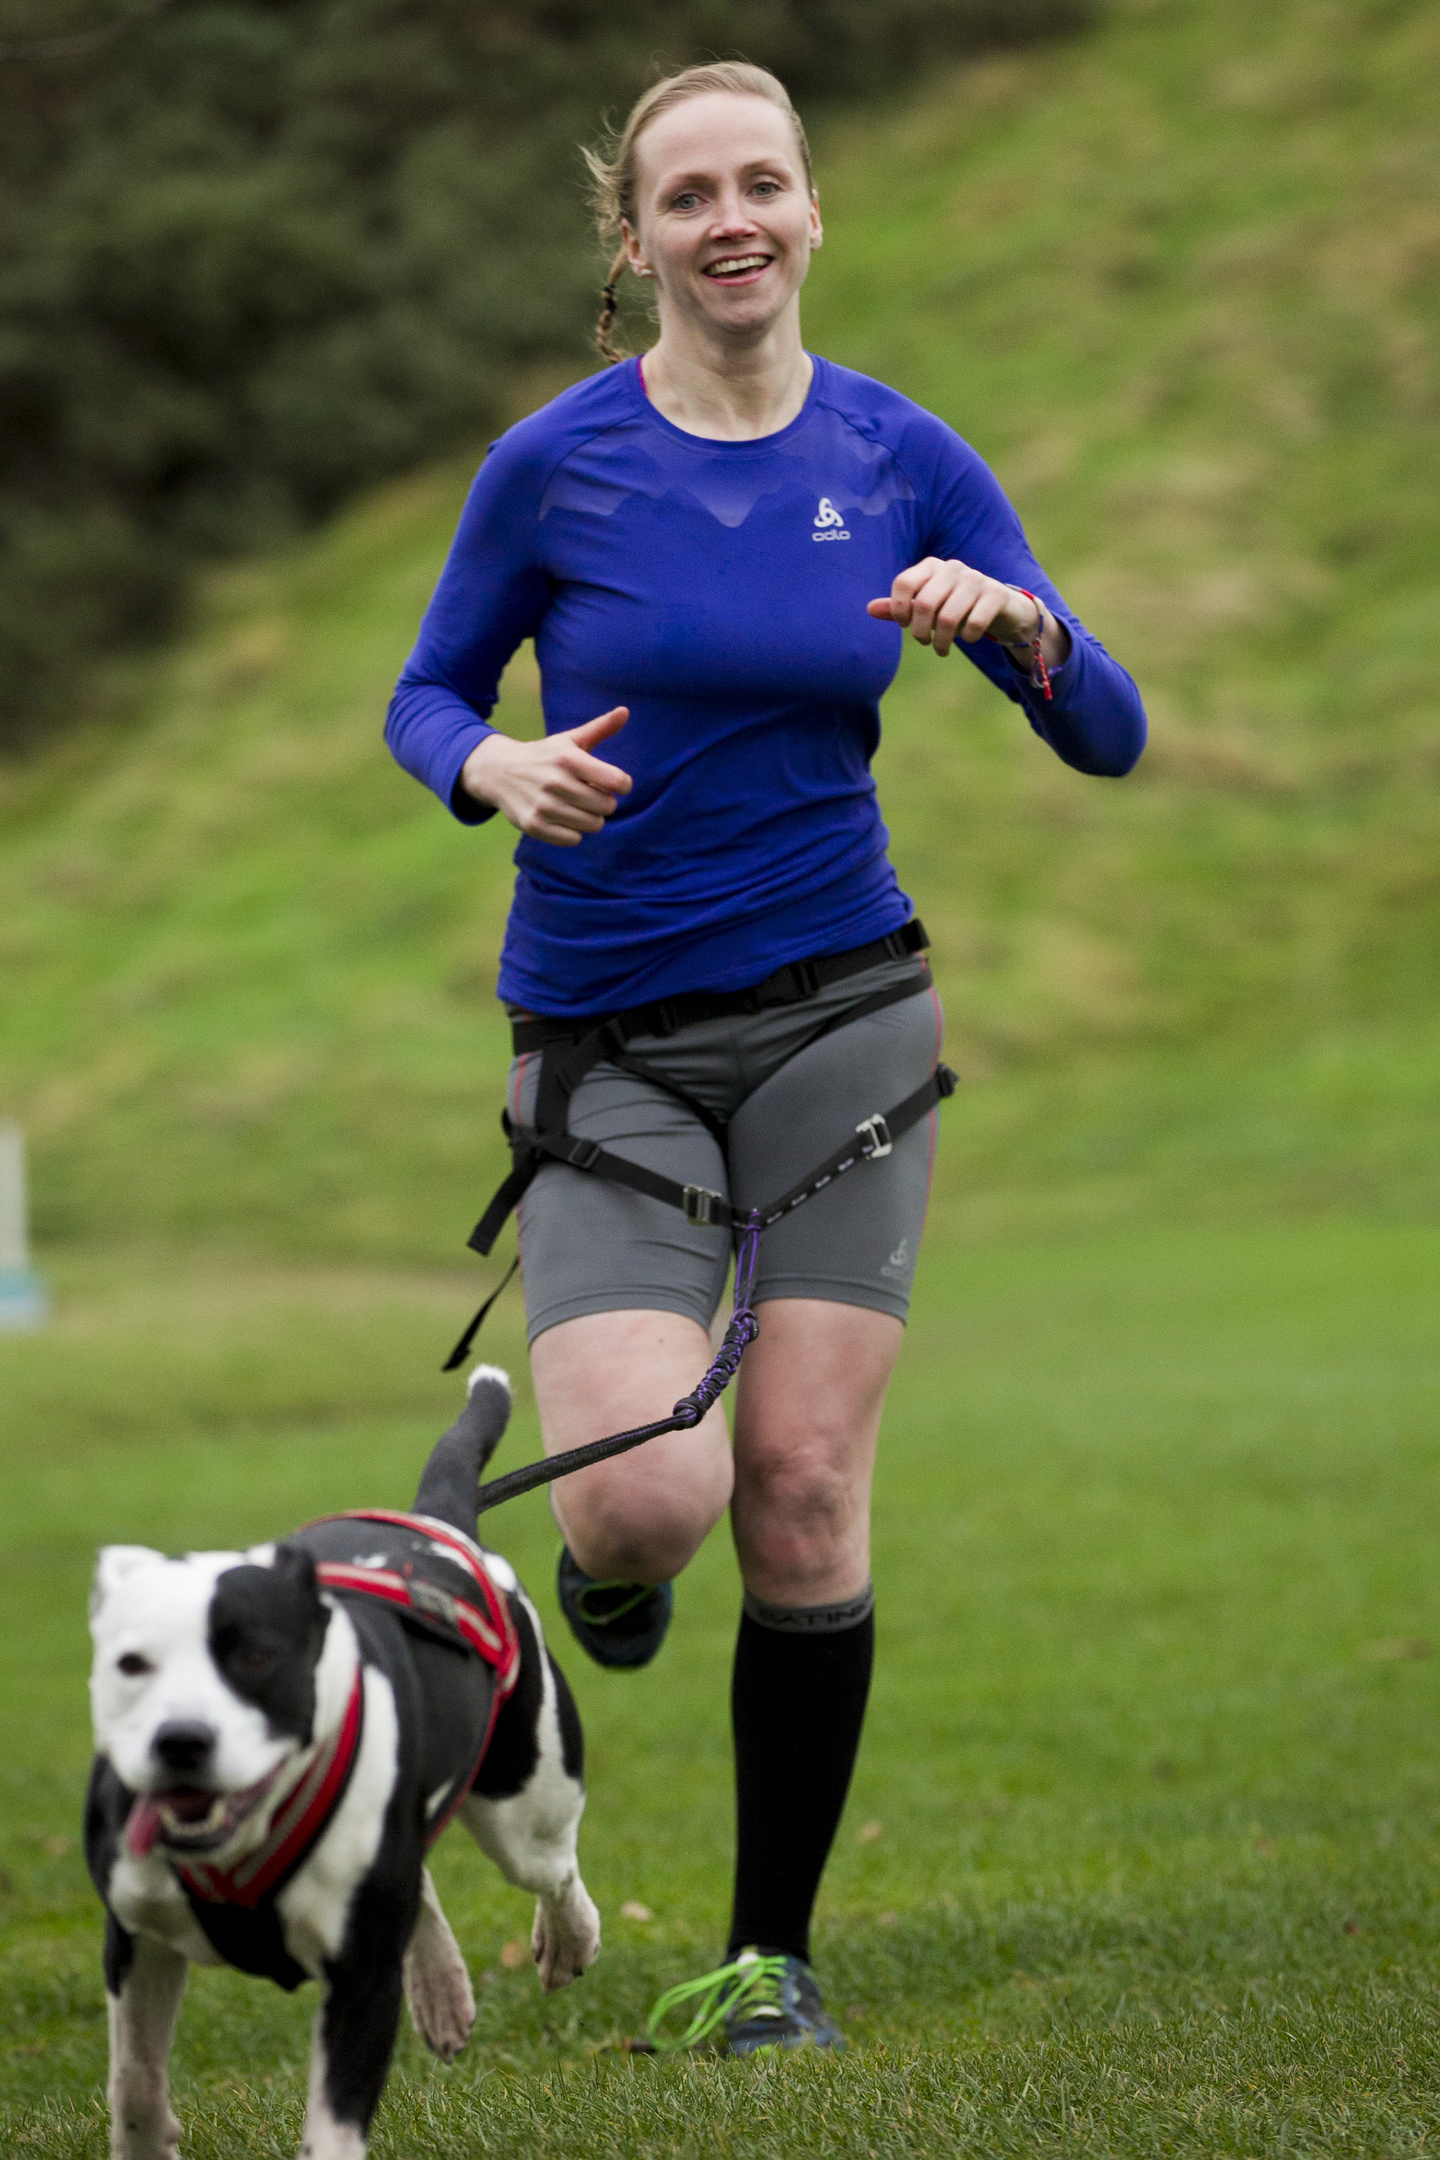 Agata out for a run at Arthur's Seat, Edinburgh (Andrew Cawley / DC Thomson)